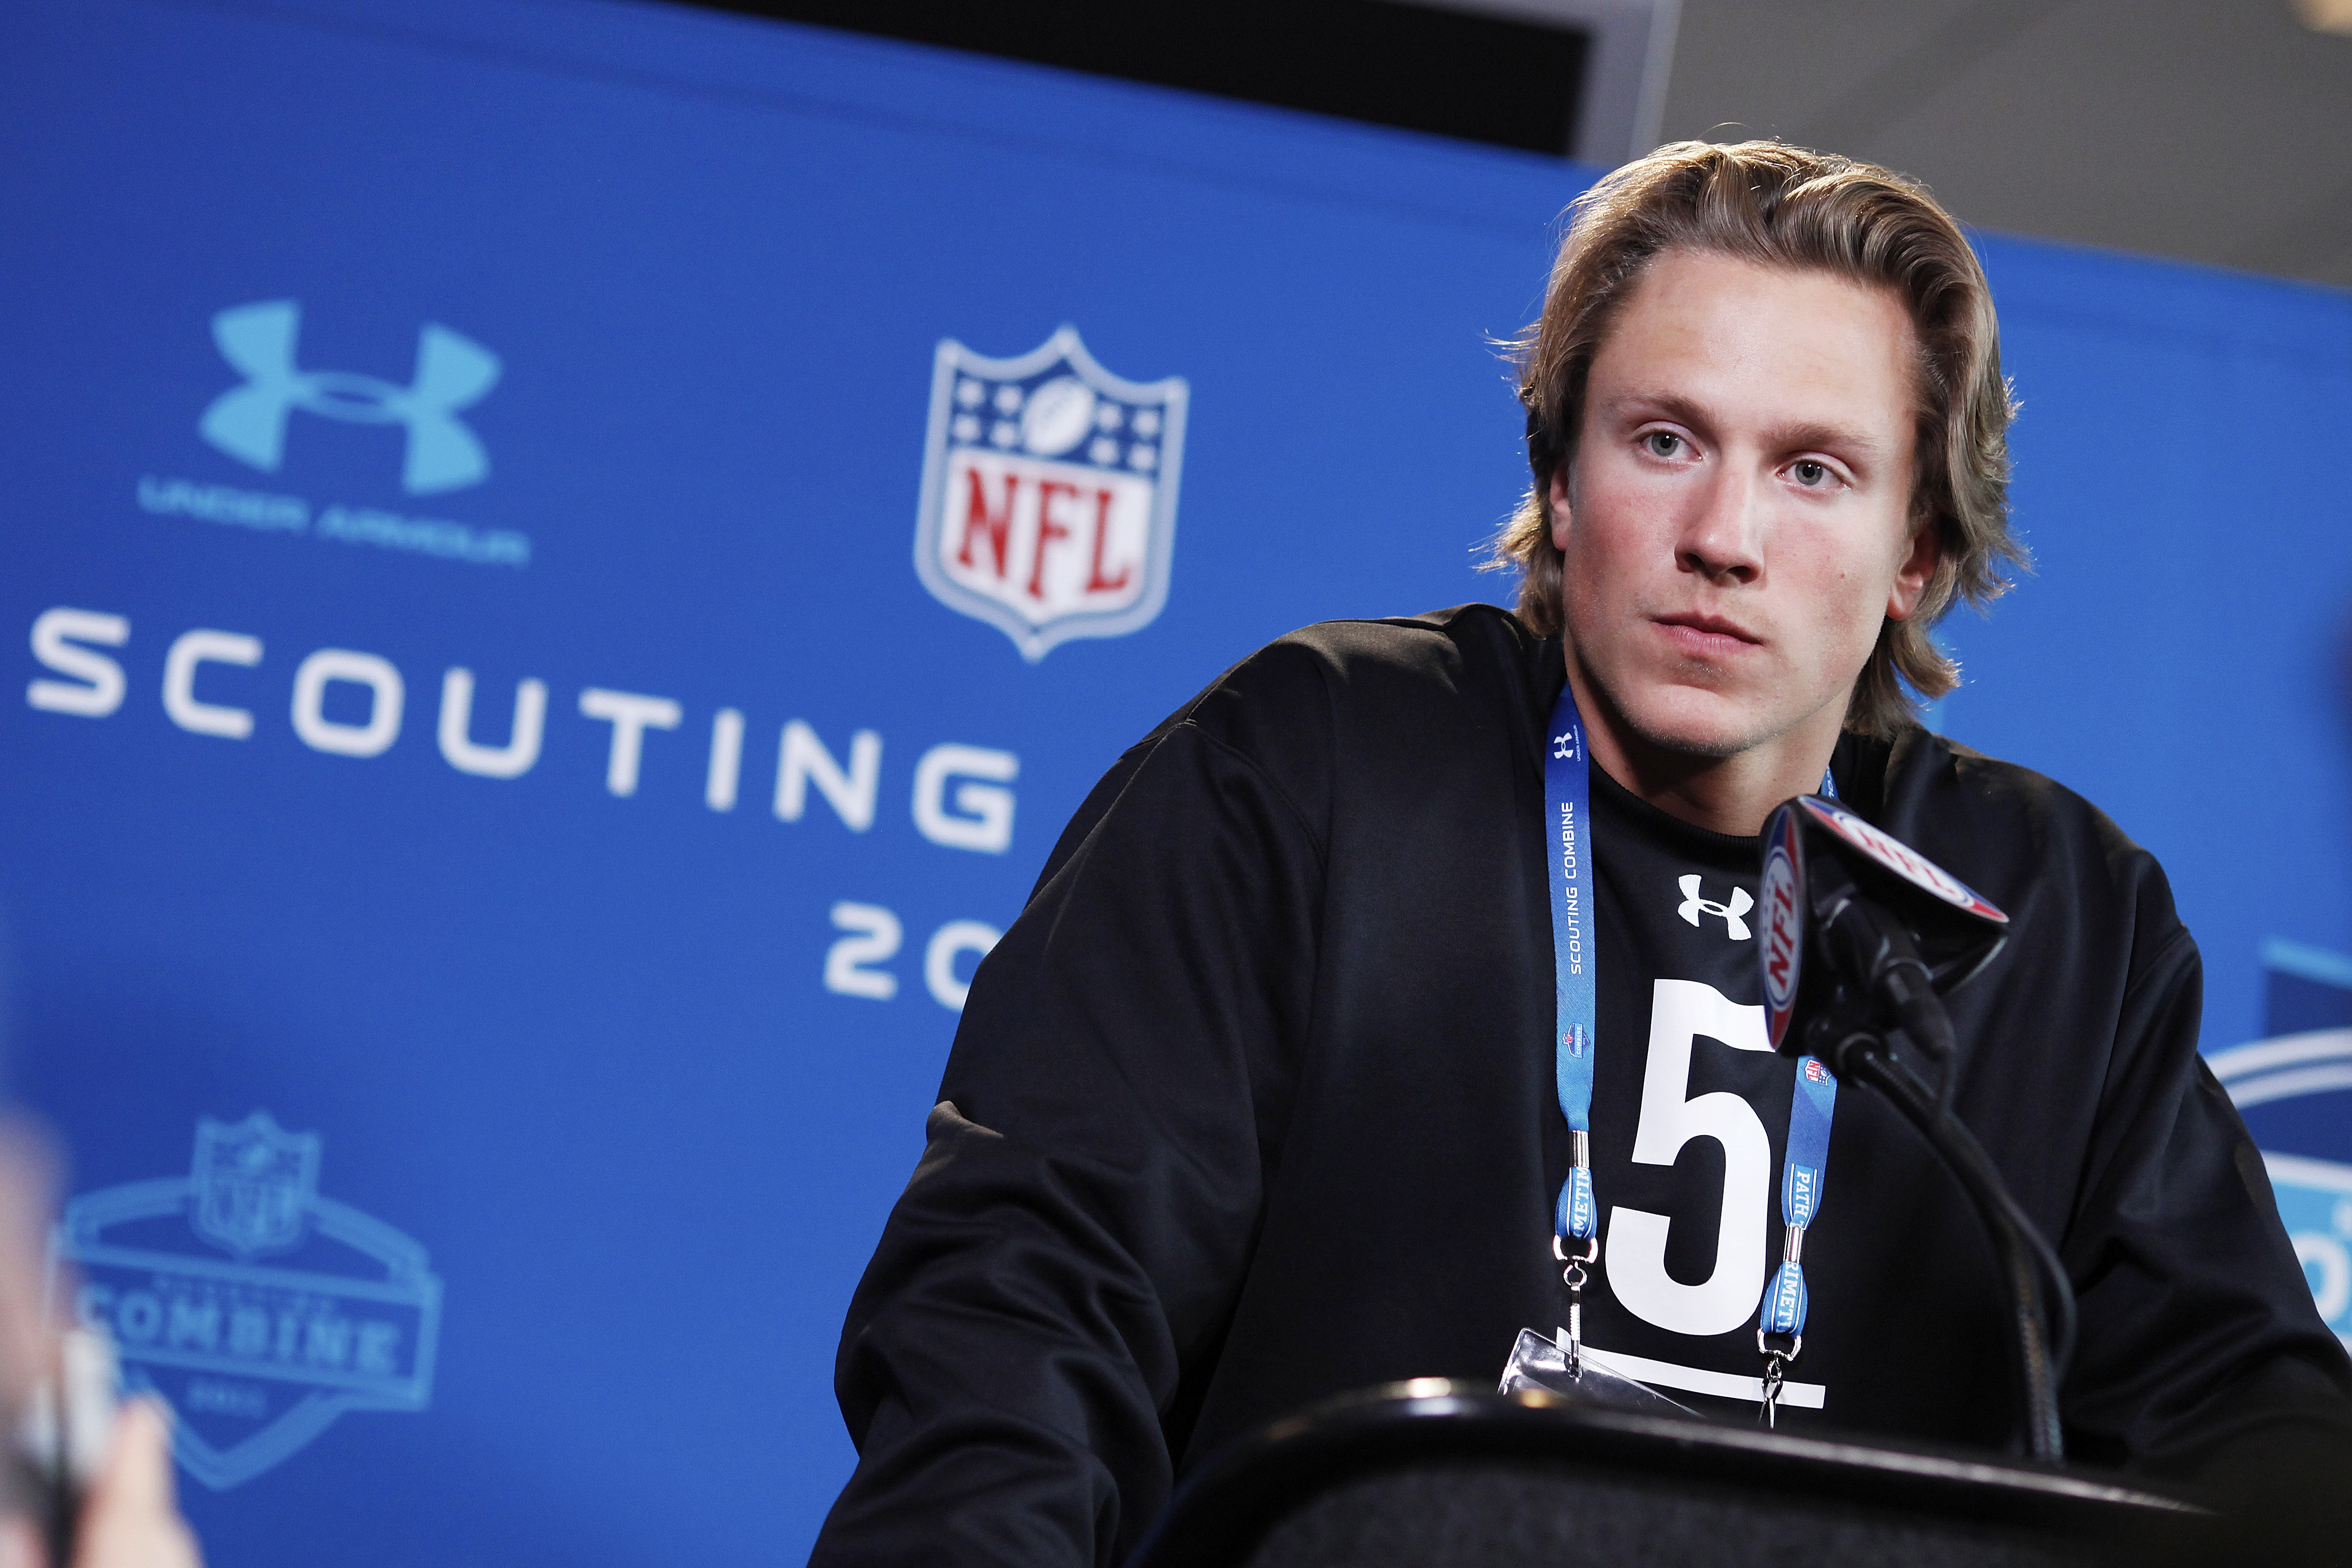 INDIANAPOLIS, IN - FEBRUARY 25:  Missouri Tigers quarterback Blaine Gabbert answers questions during a media session at the 2011 NFL Scouting Combine at Lucas Oil Stadium on February 25, 2011 in Indianapolis, Indiana. (Photo by Joe Robbins/Getty Images)